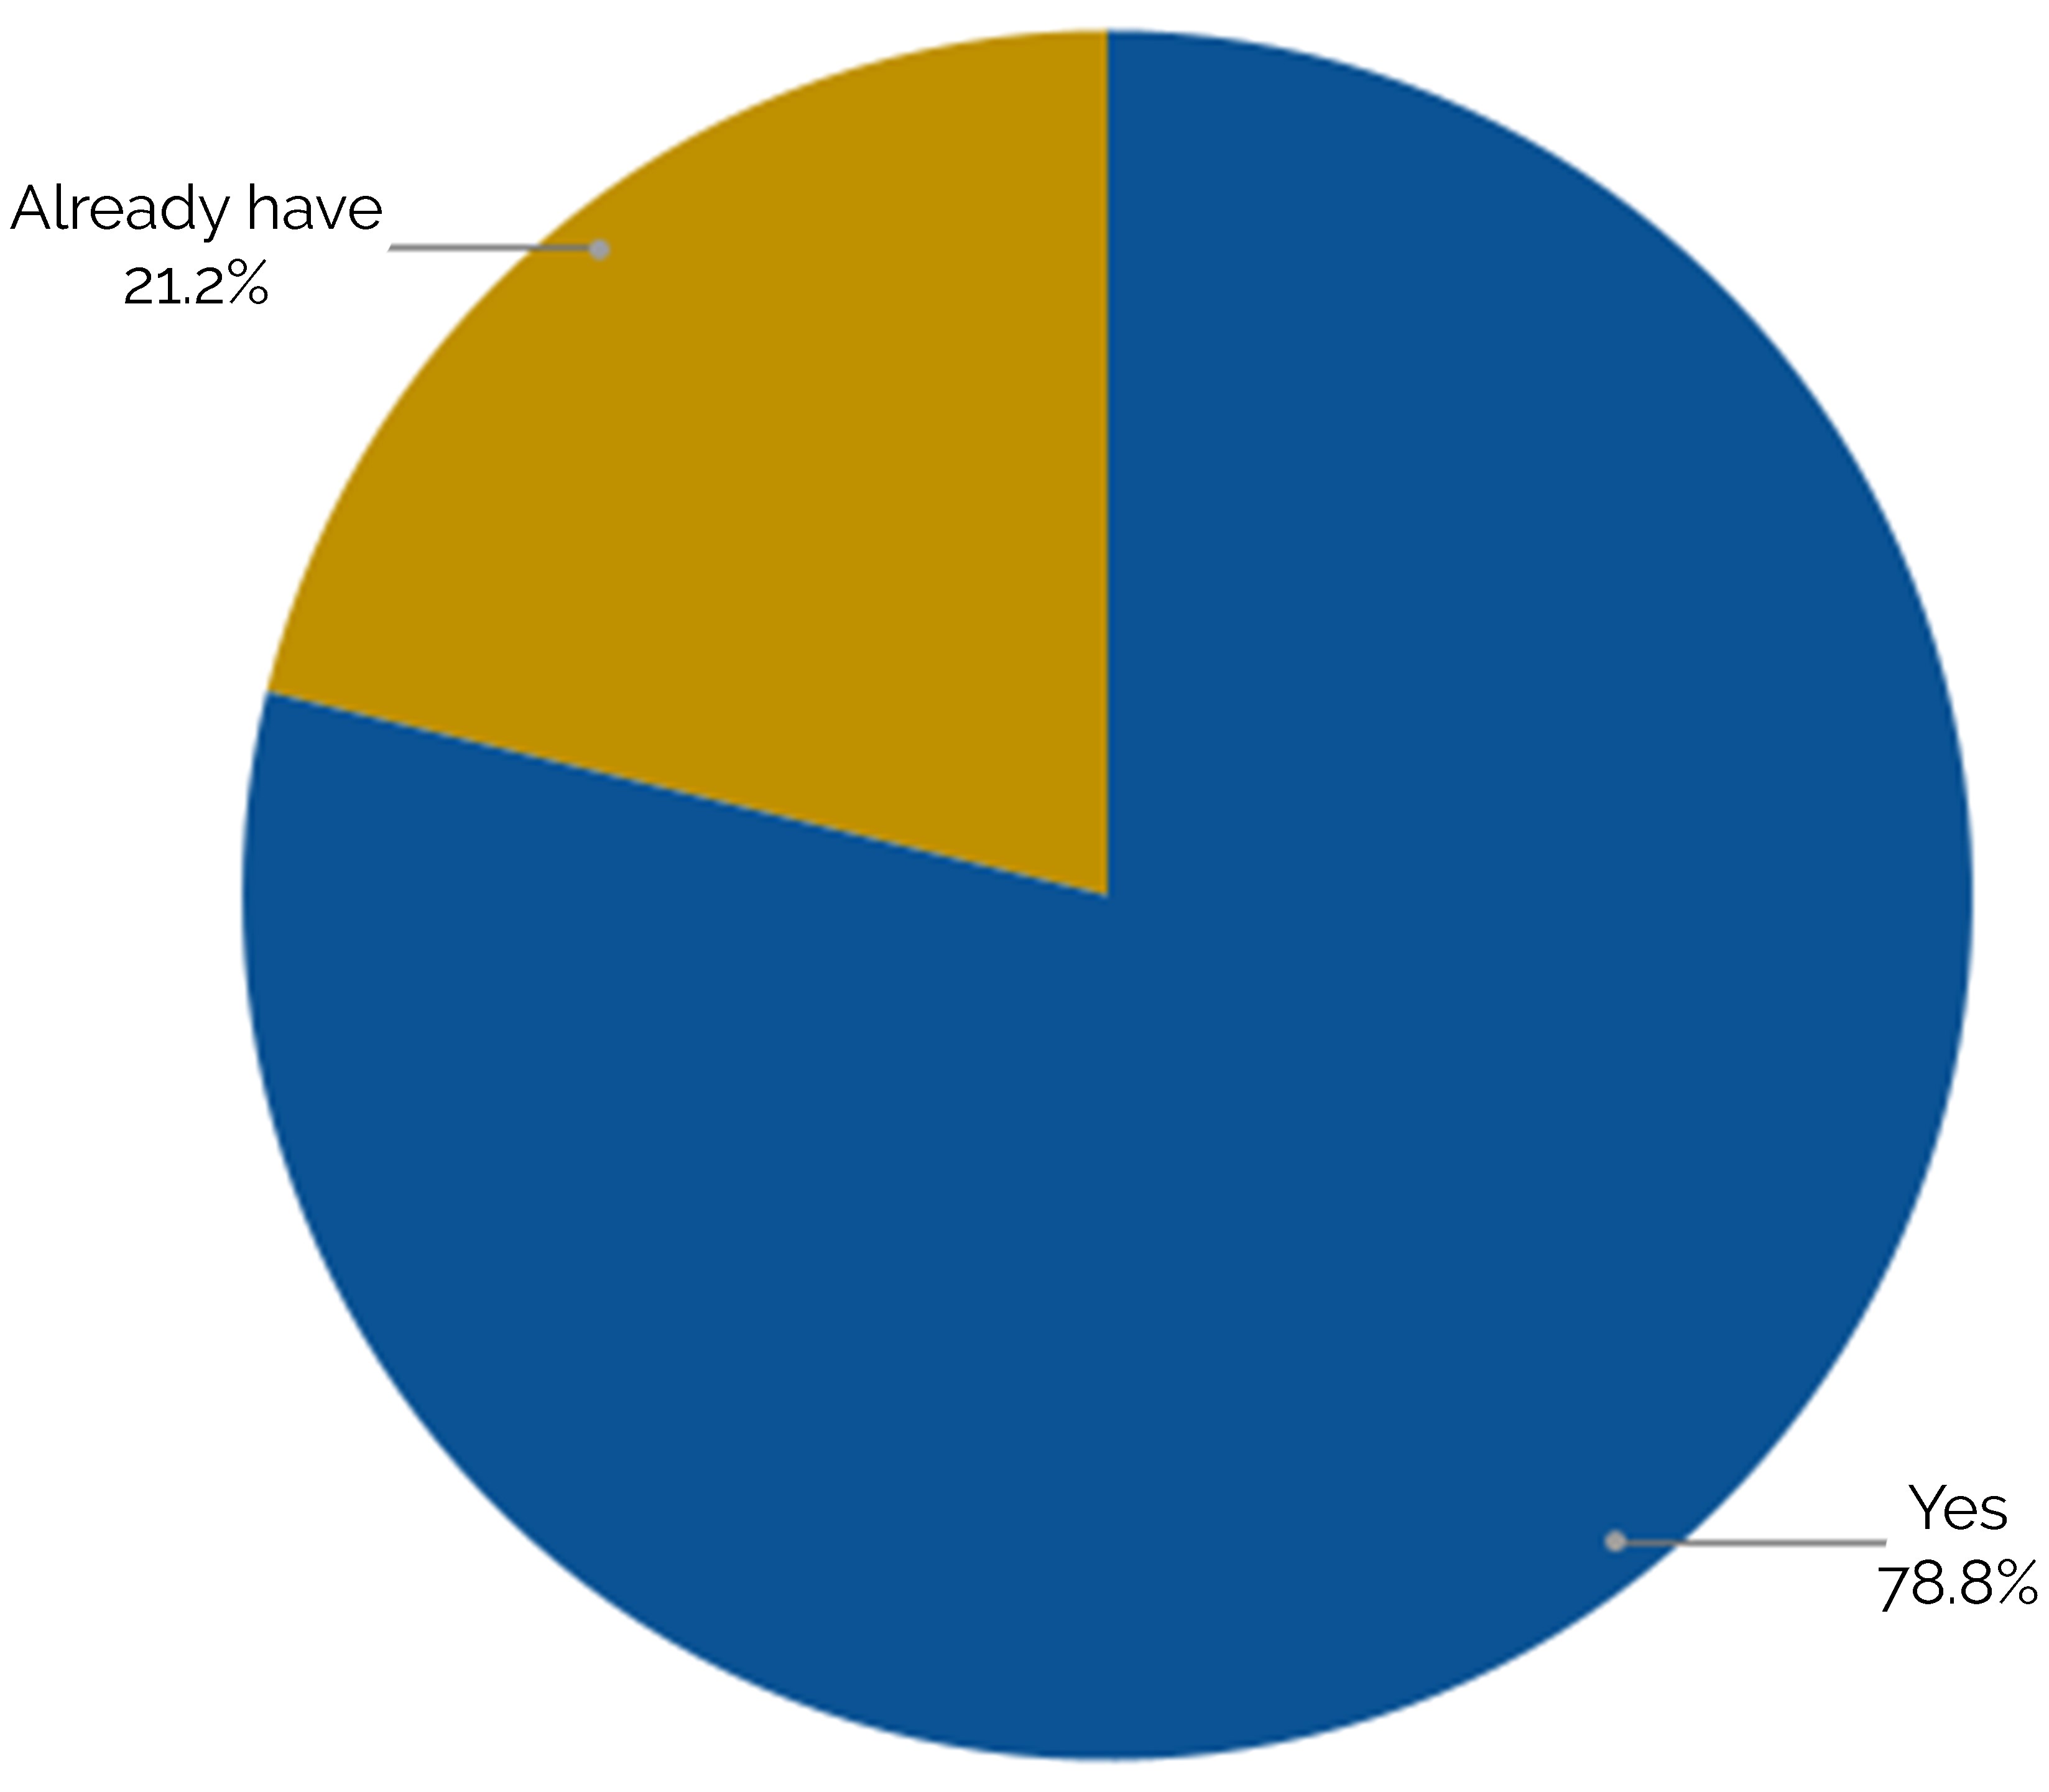 Pie chart showing 78.8% of people WySCI supported would recommend WySCI while the remaining 21.2% already have.